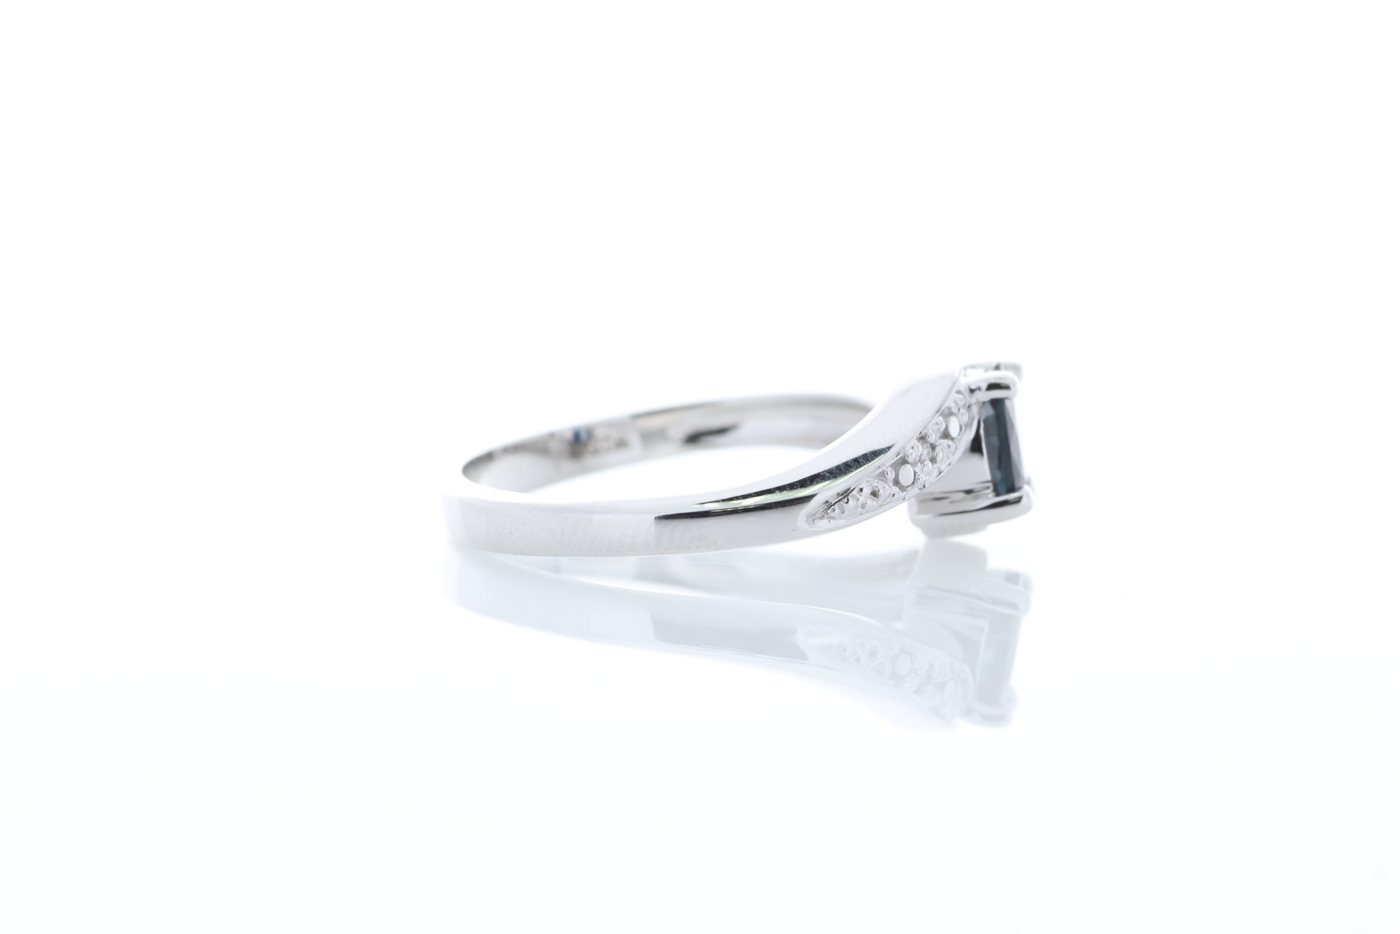 9ct White Gold Diamond And Sapphire Ring 0.01 Carats - Image 4 of 5